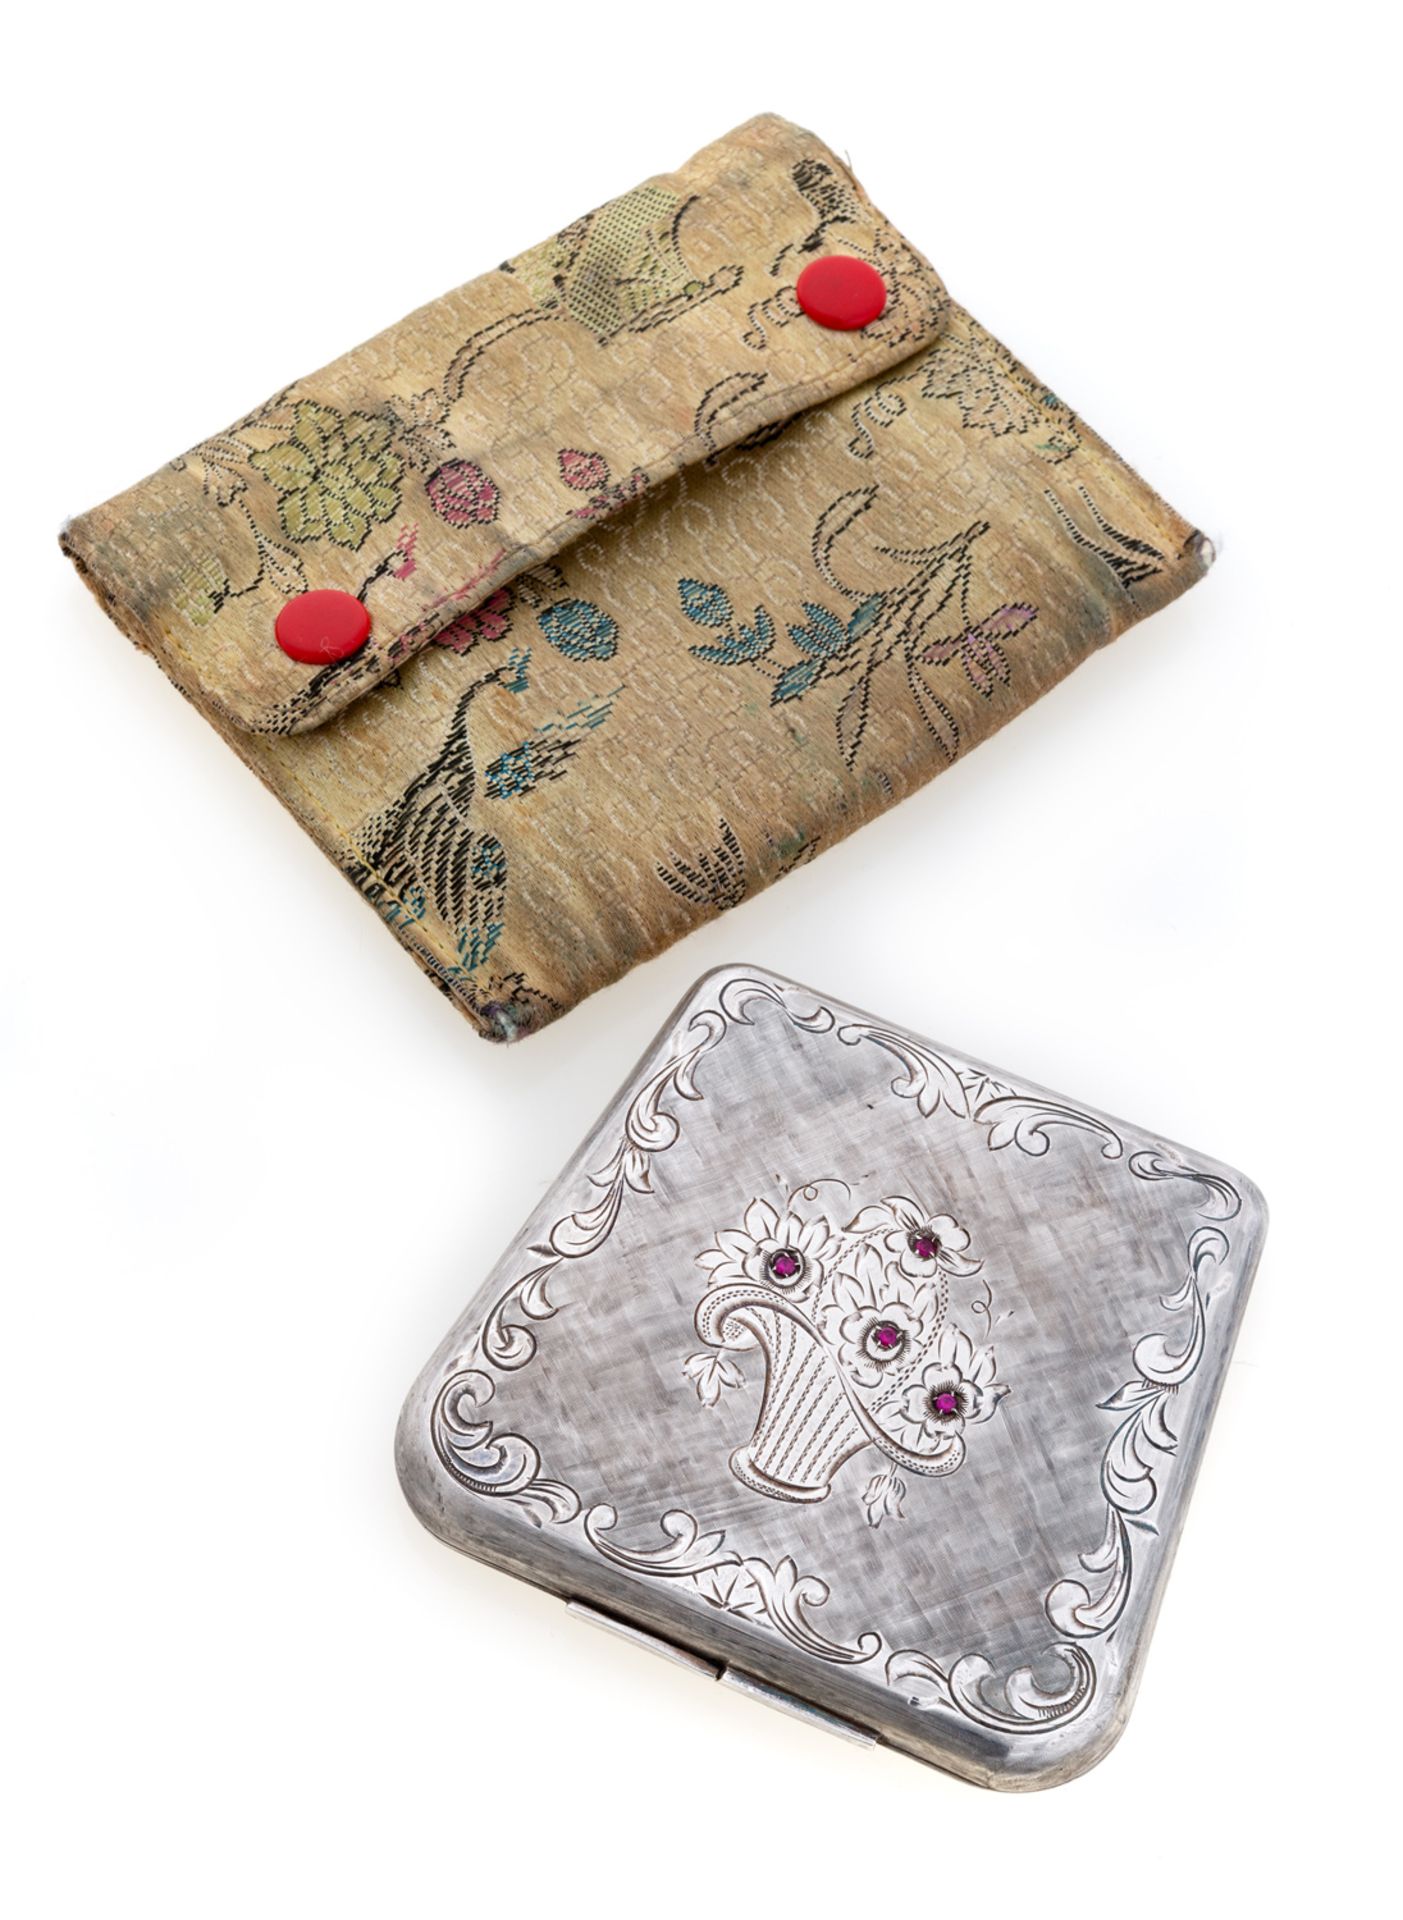 POWDER TIN IN SILVER WITH RUBIES